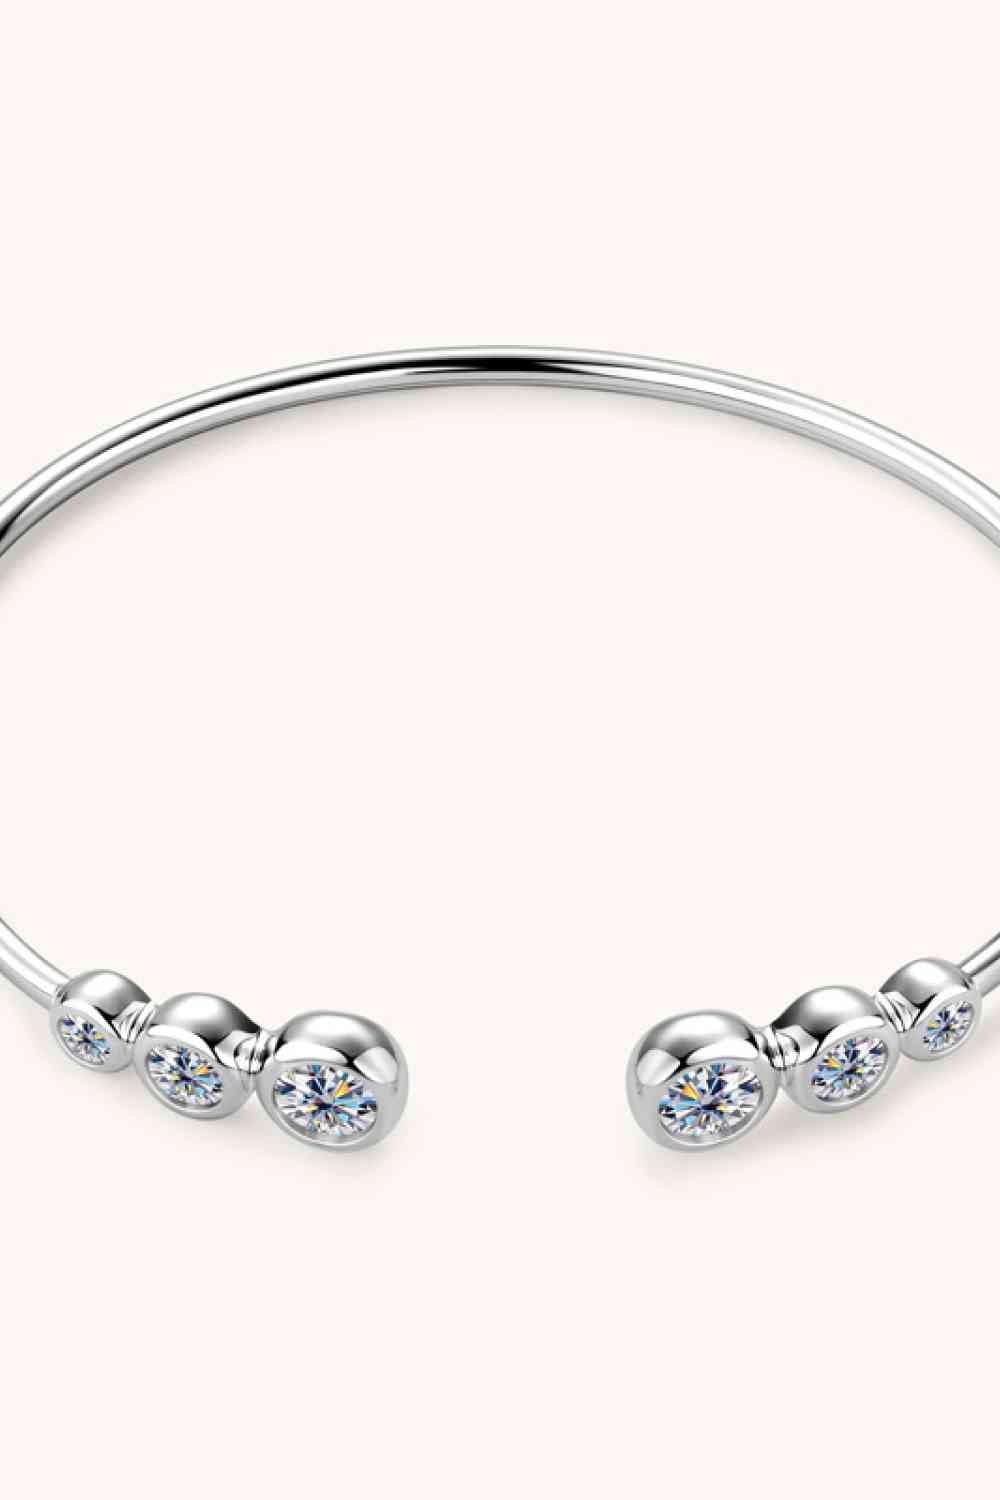 a silver bracelet with three stones on it